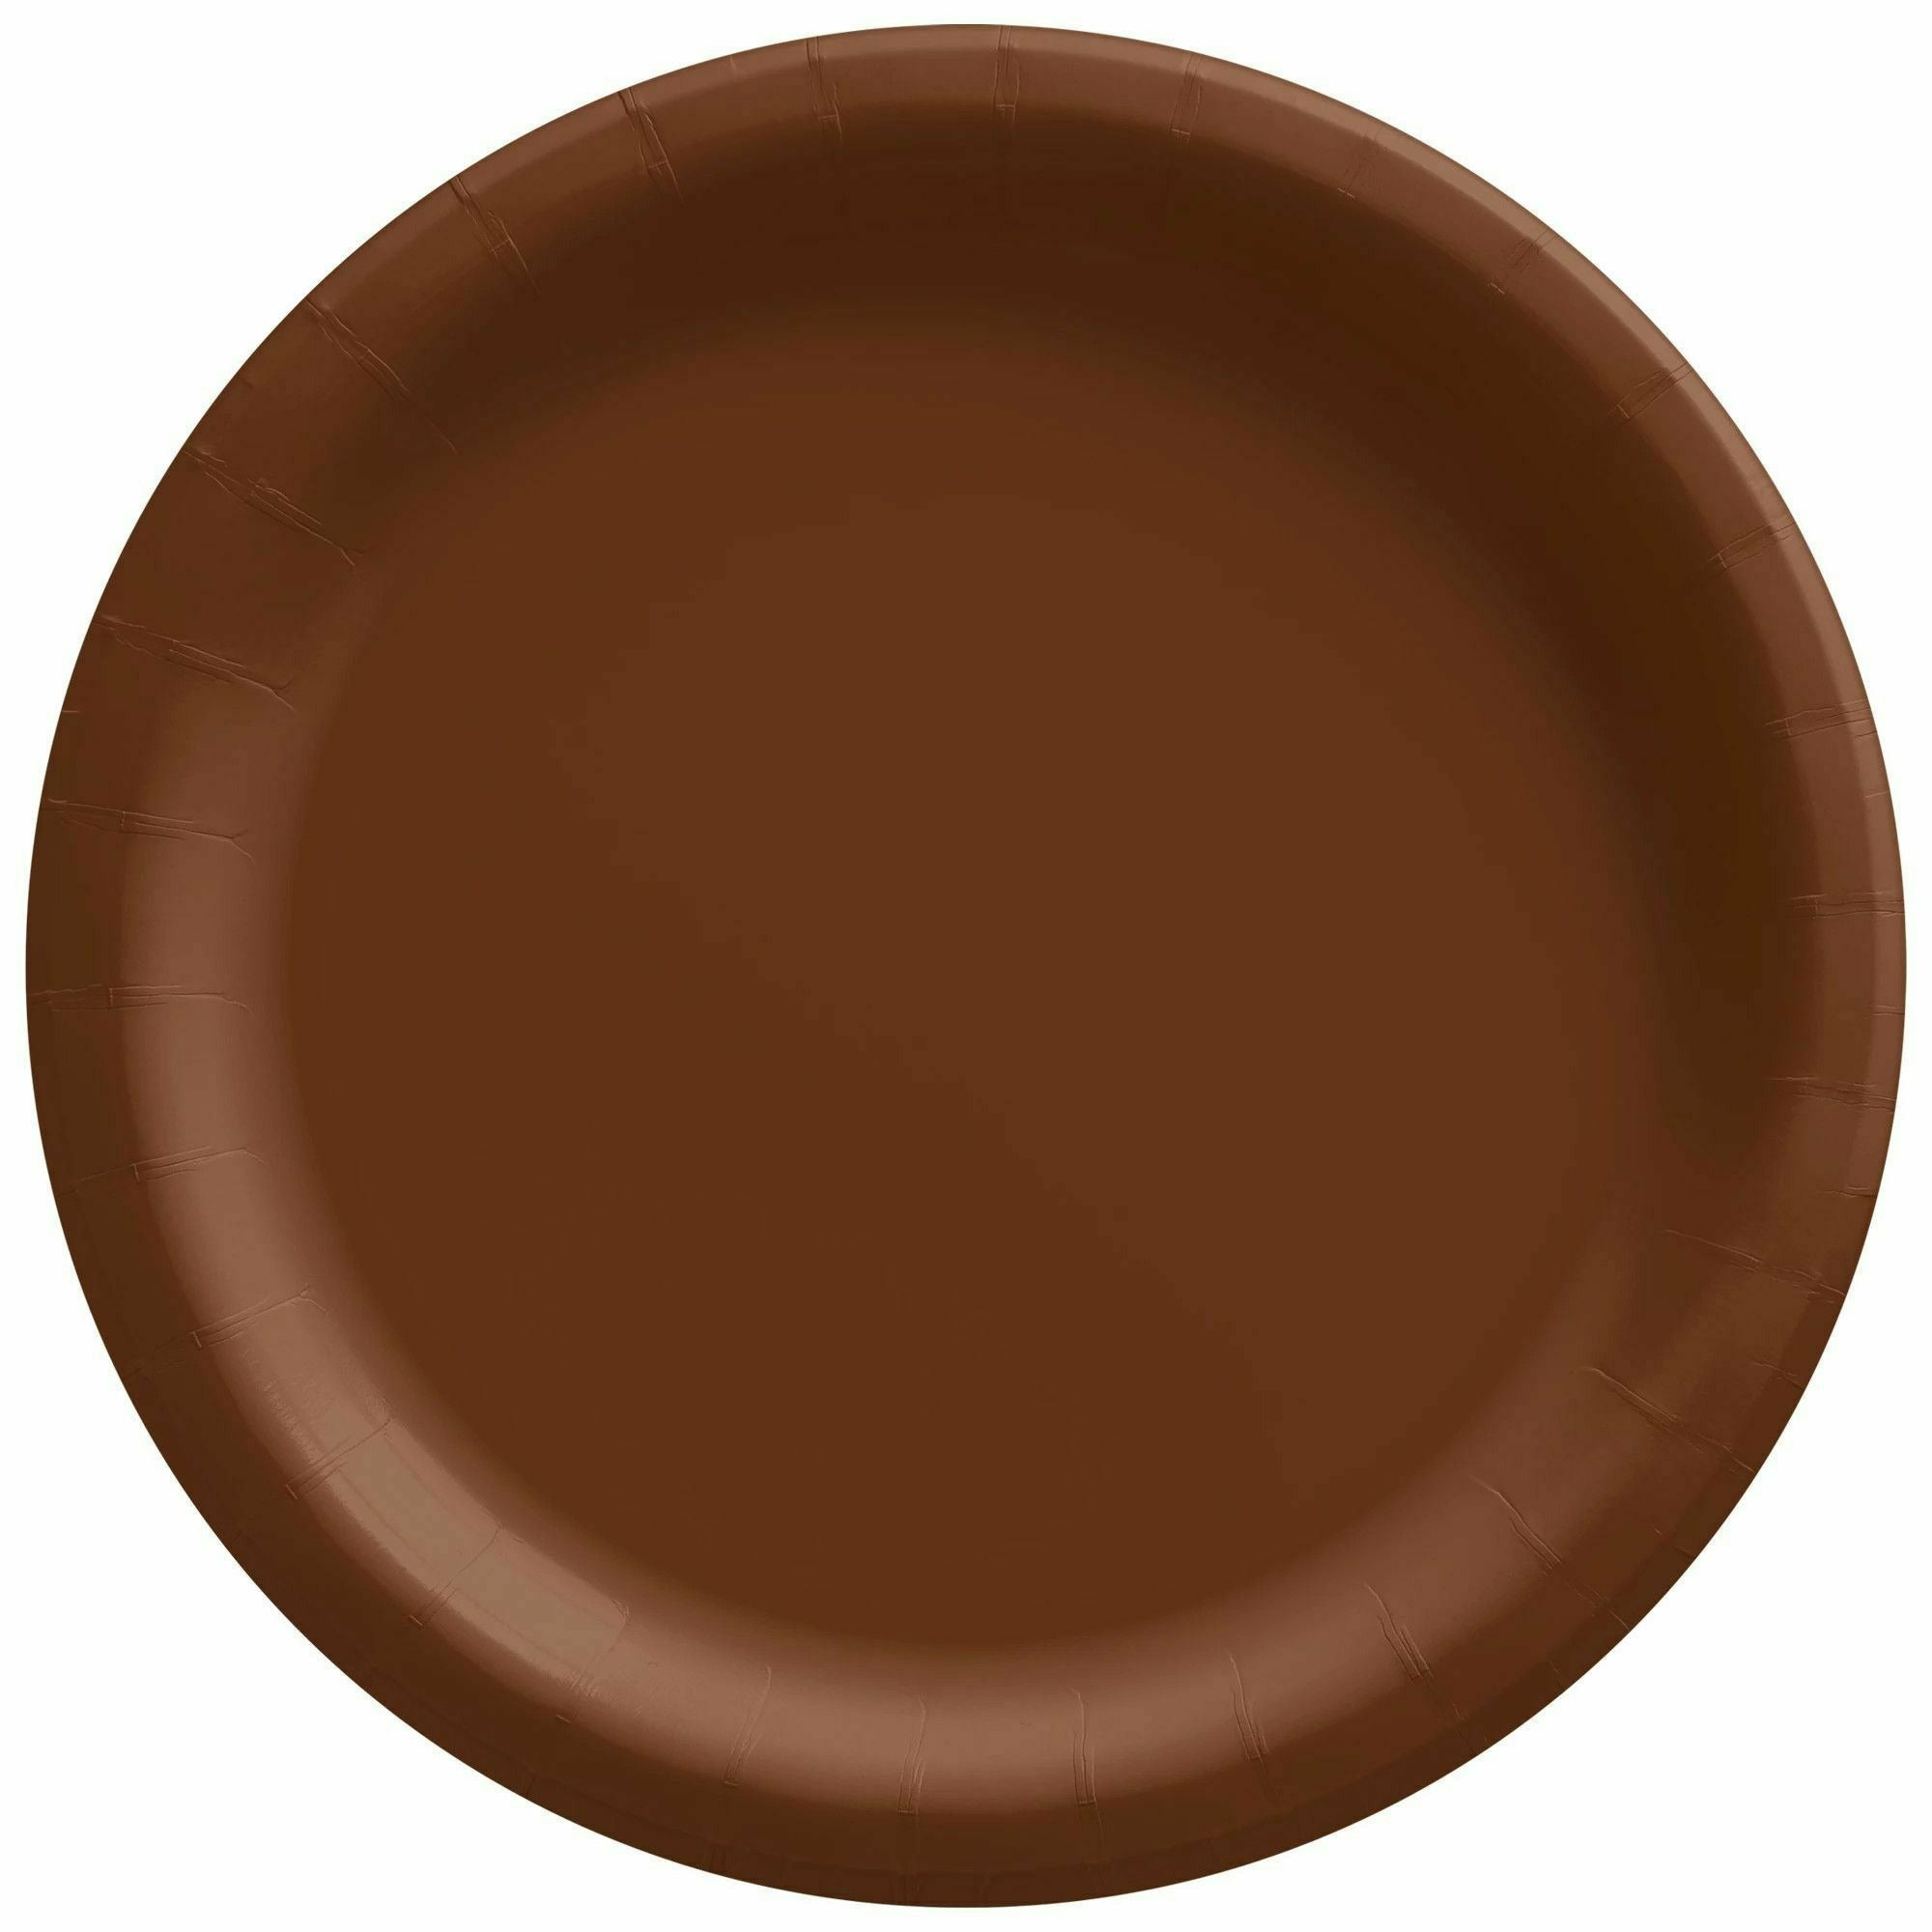 Amscan BASIC Chocolate Brown - 8 1/2" Round Paper Plates, 20 Ct.